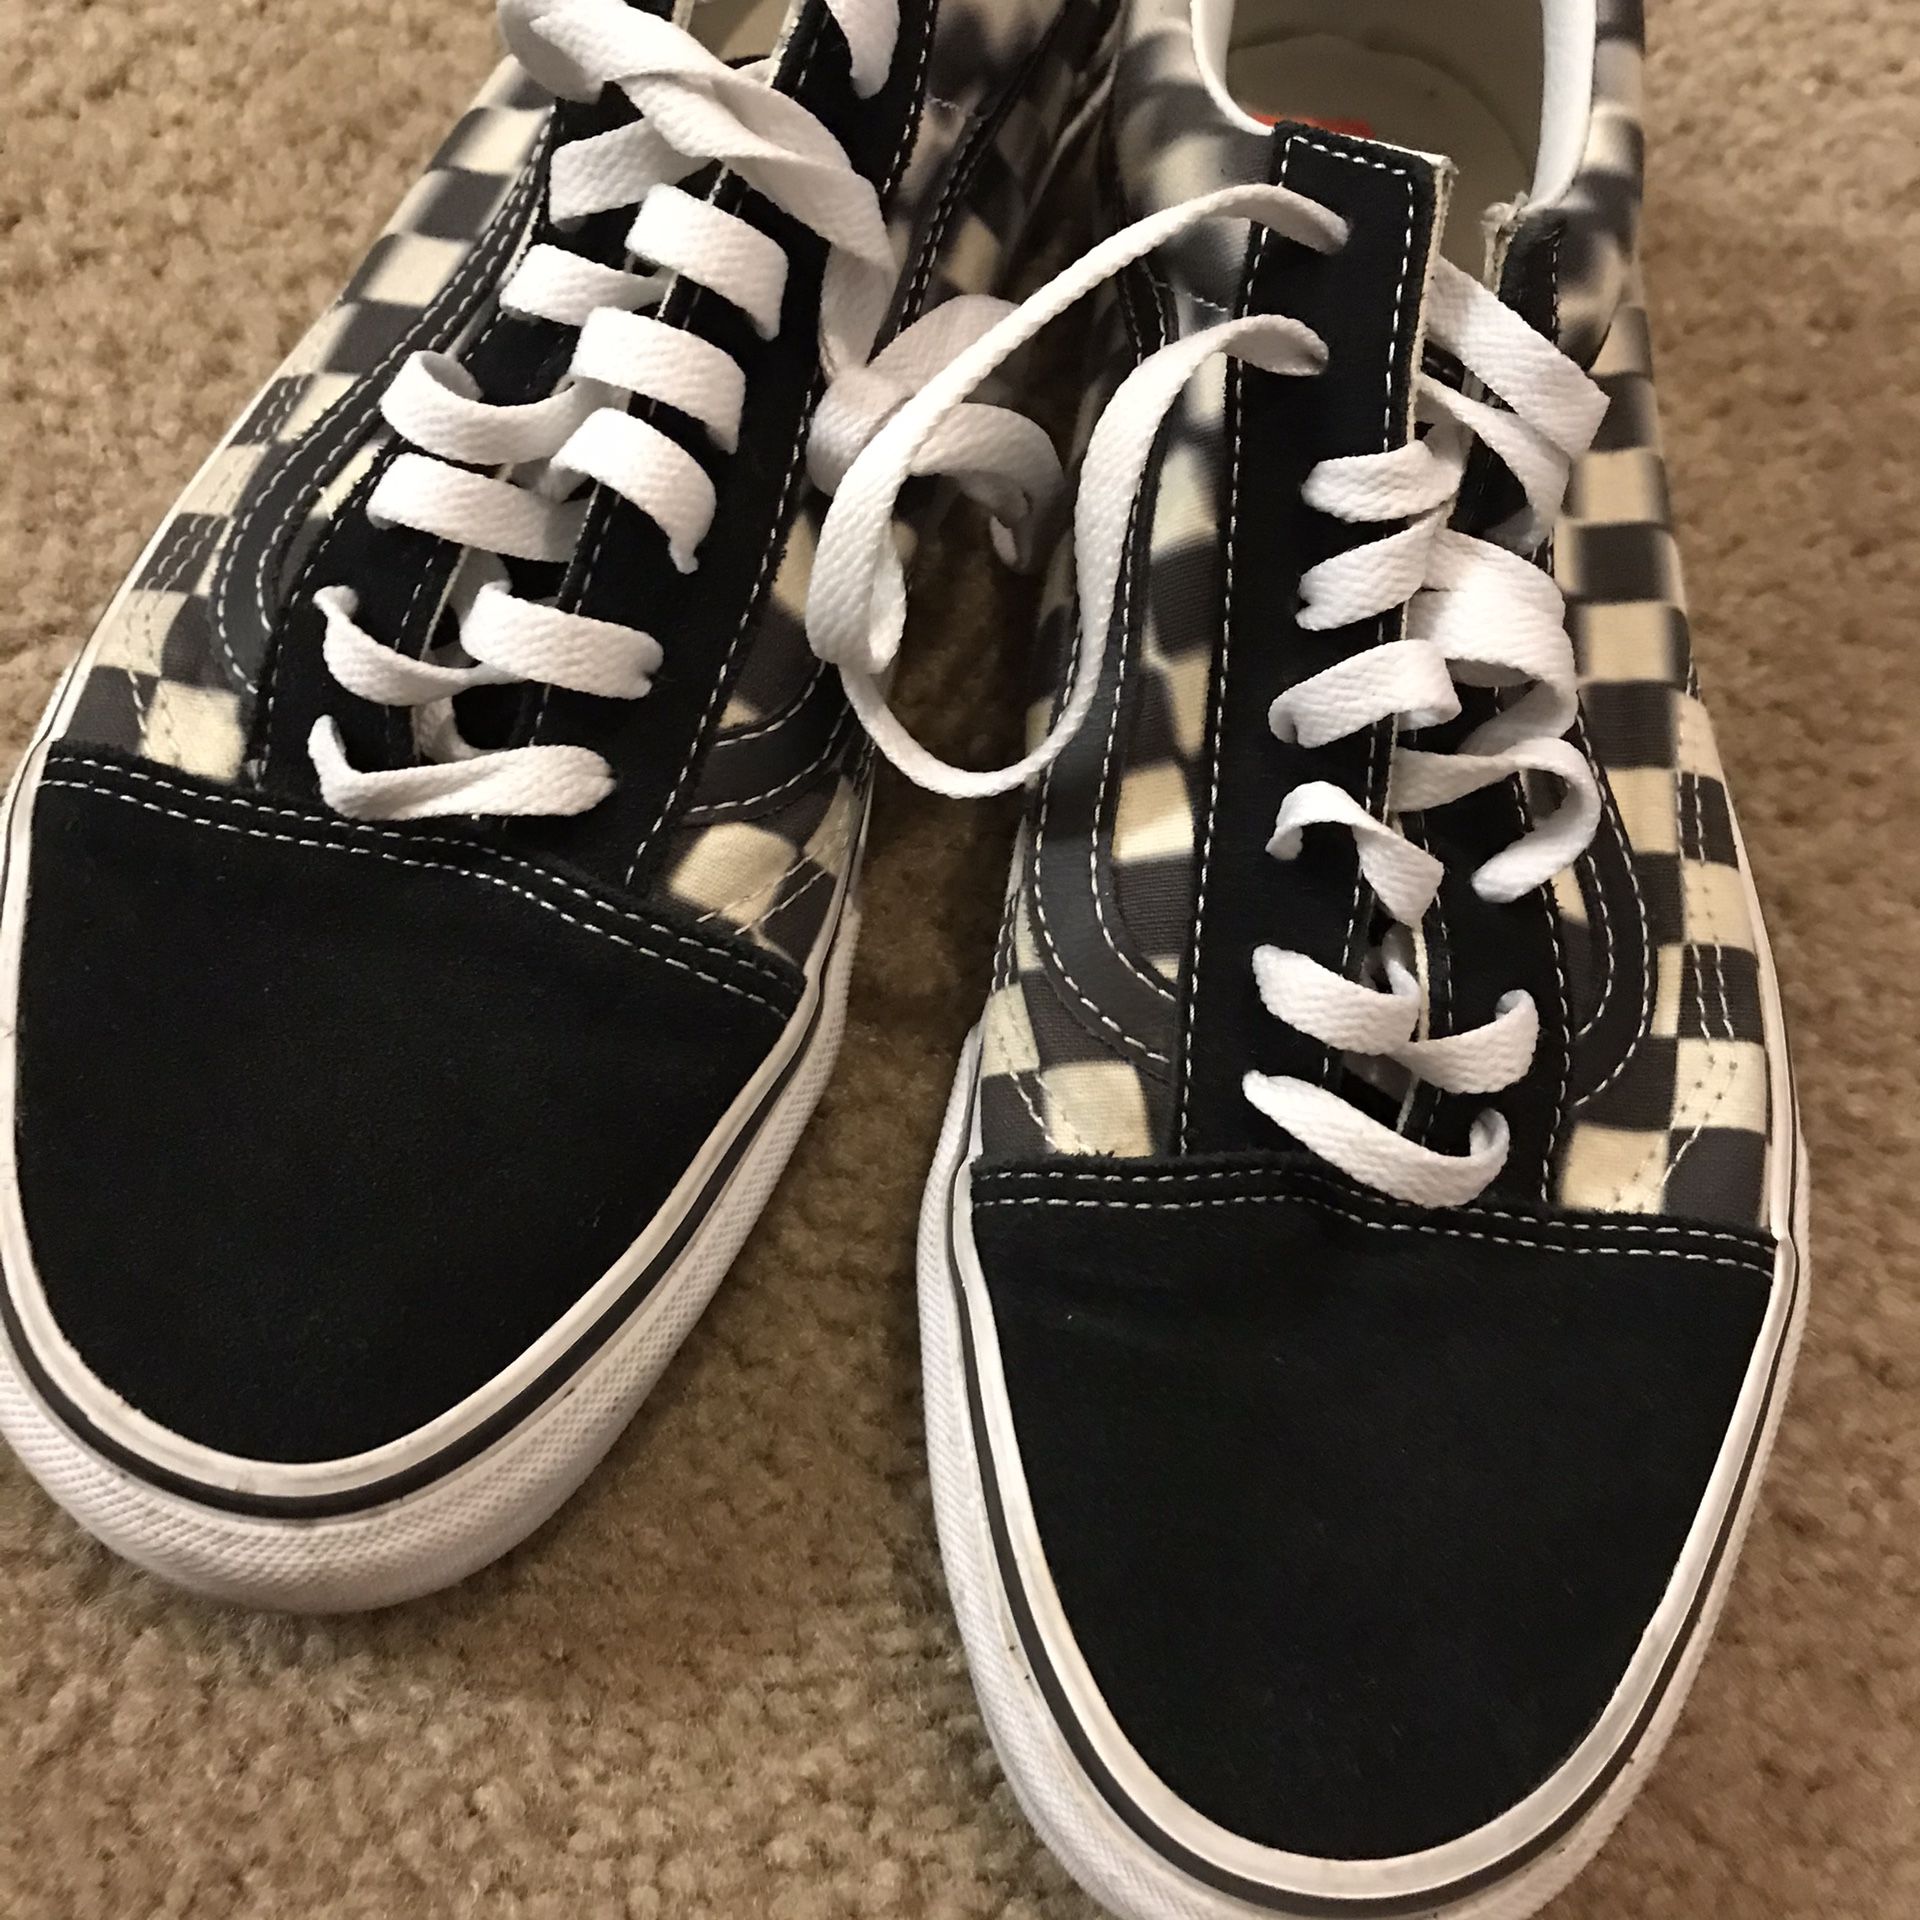 Almost new checkered Vans size 9.5